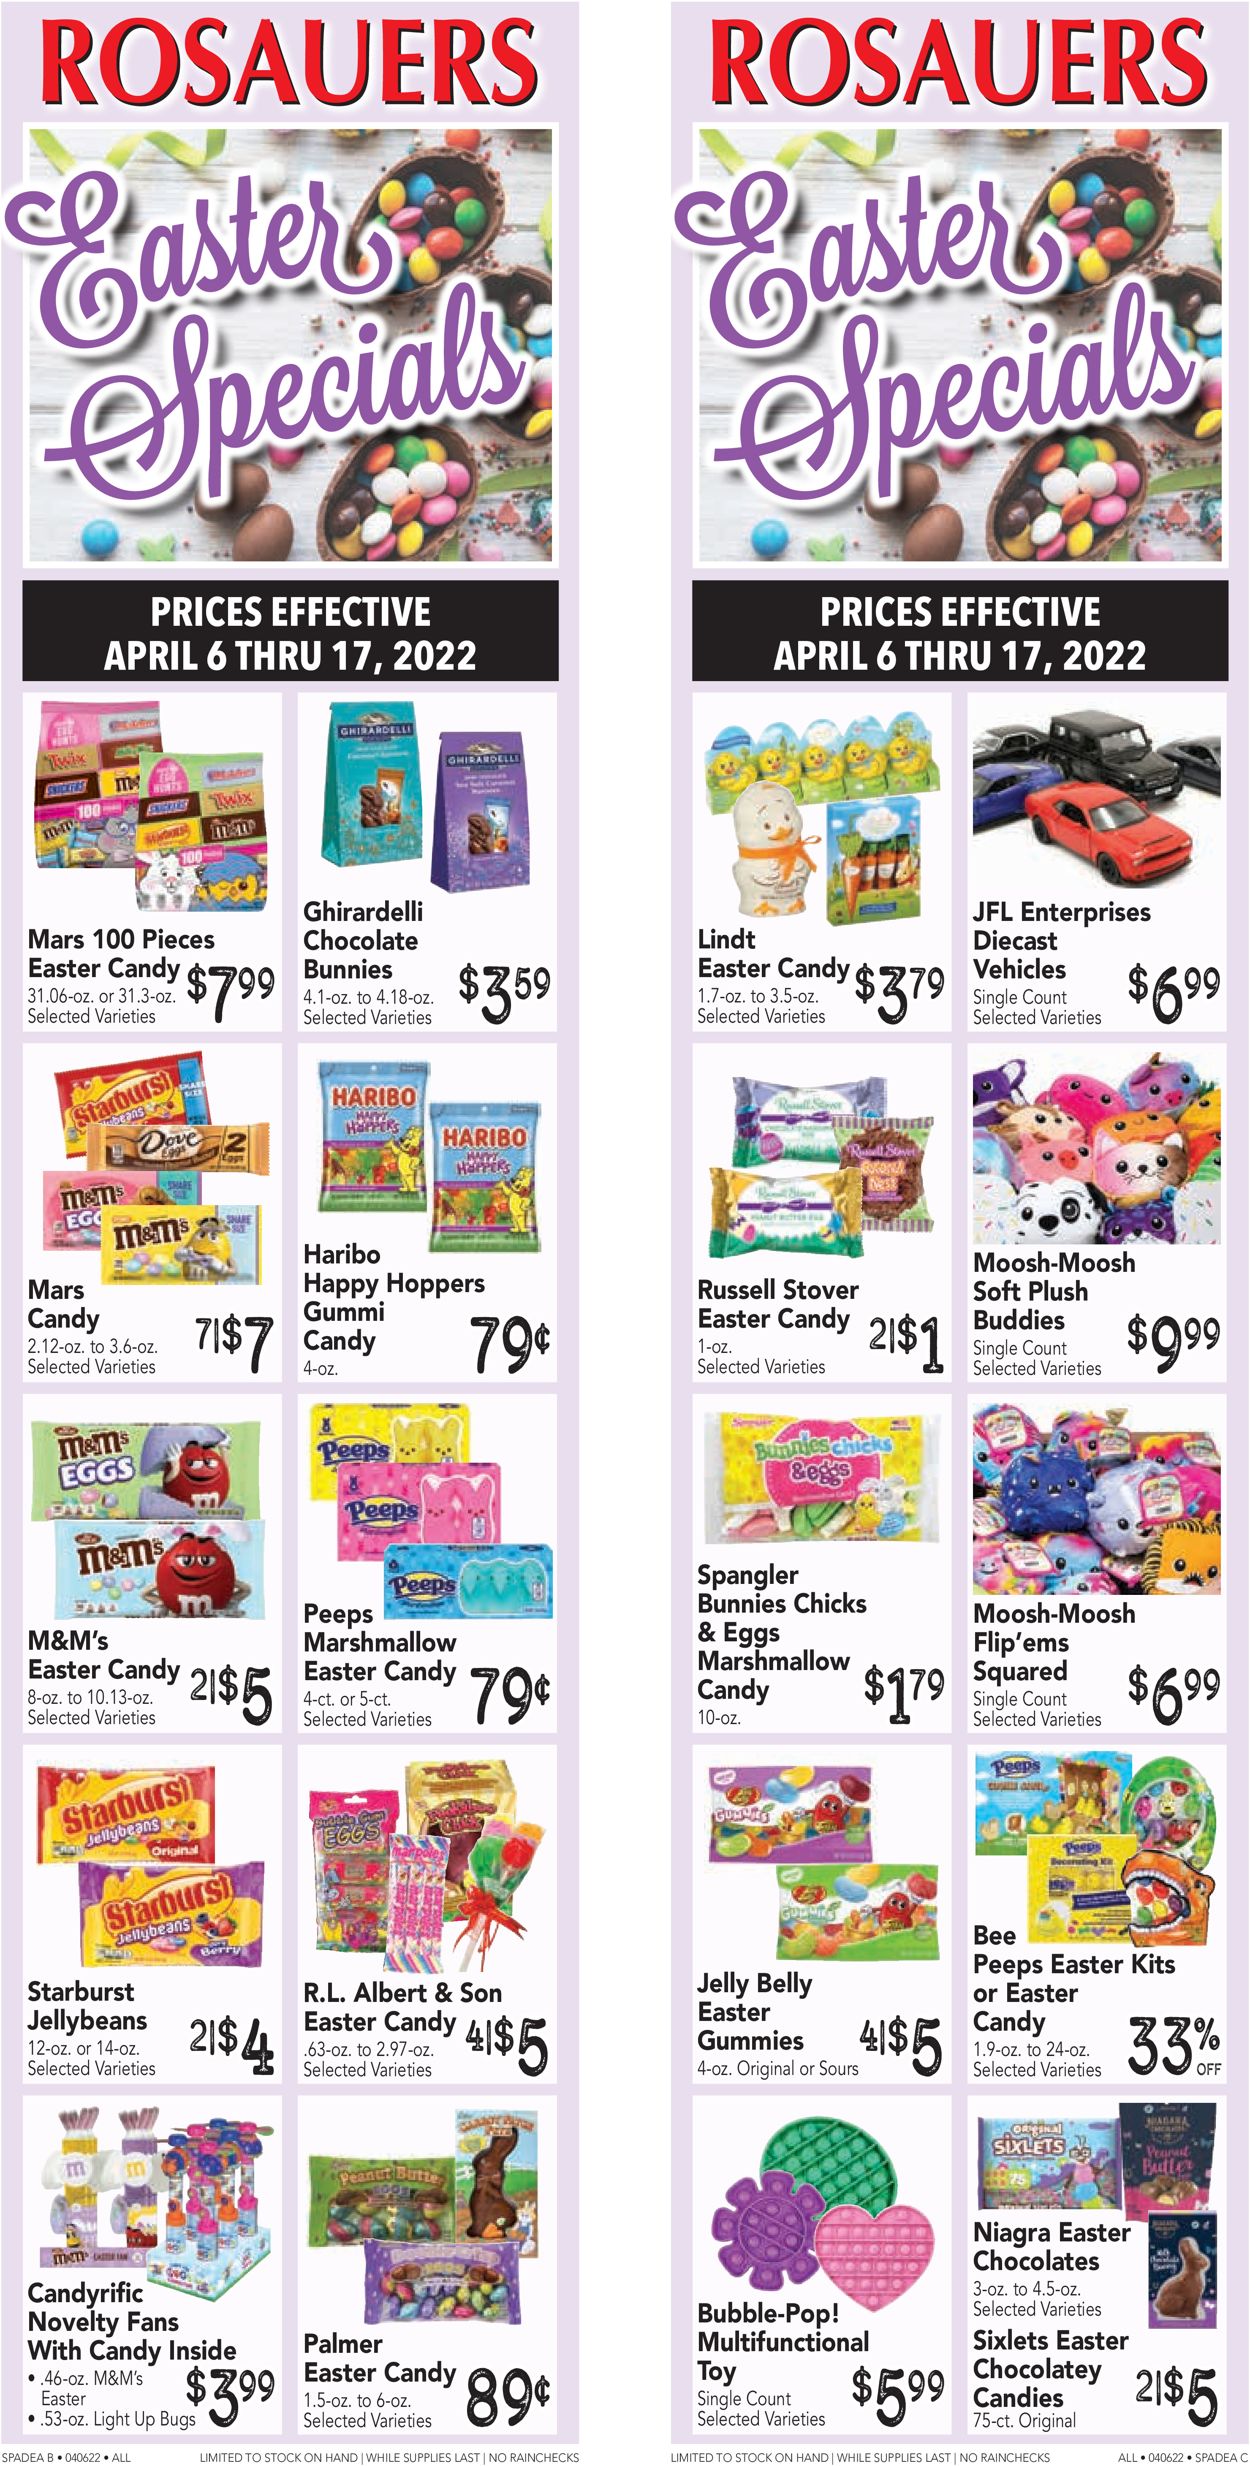 Rosauers EASTER 2022 Weekly Ad Circular - valid 04/06-04/17/2022 (Page 2)